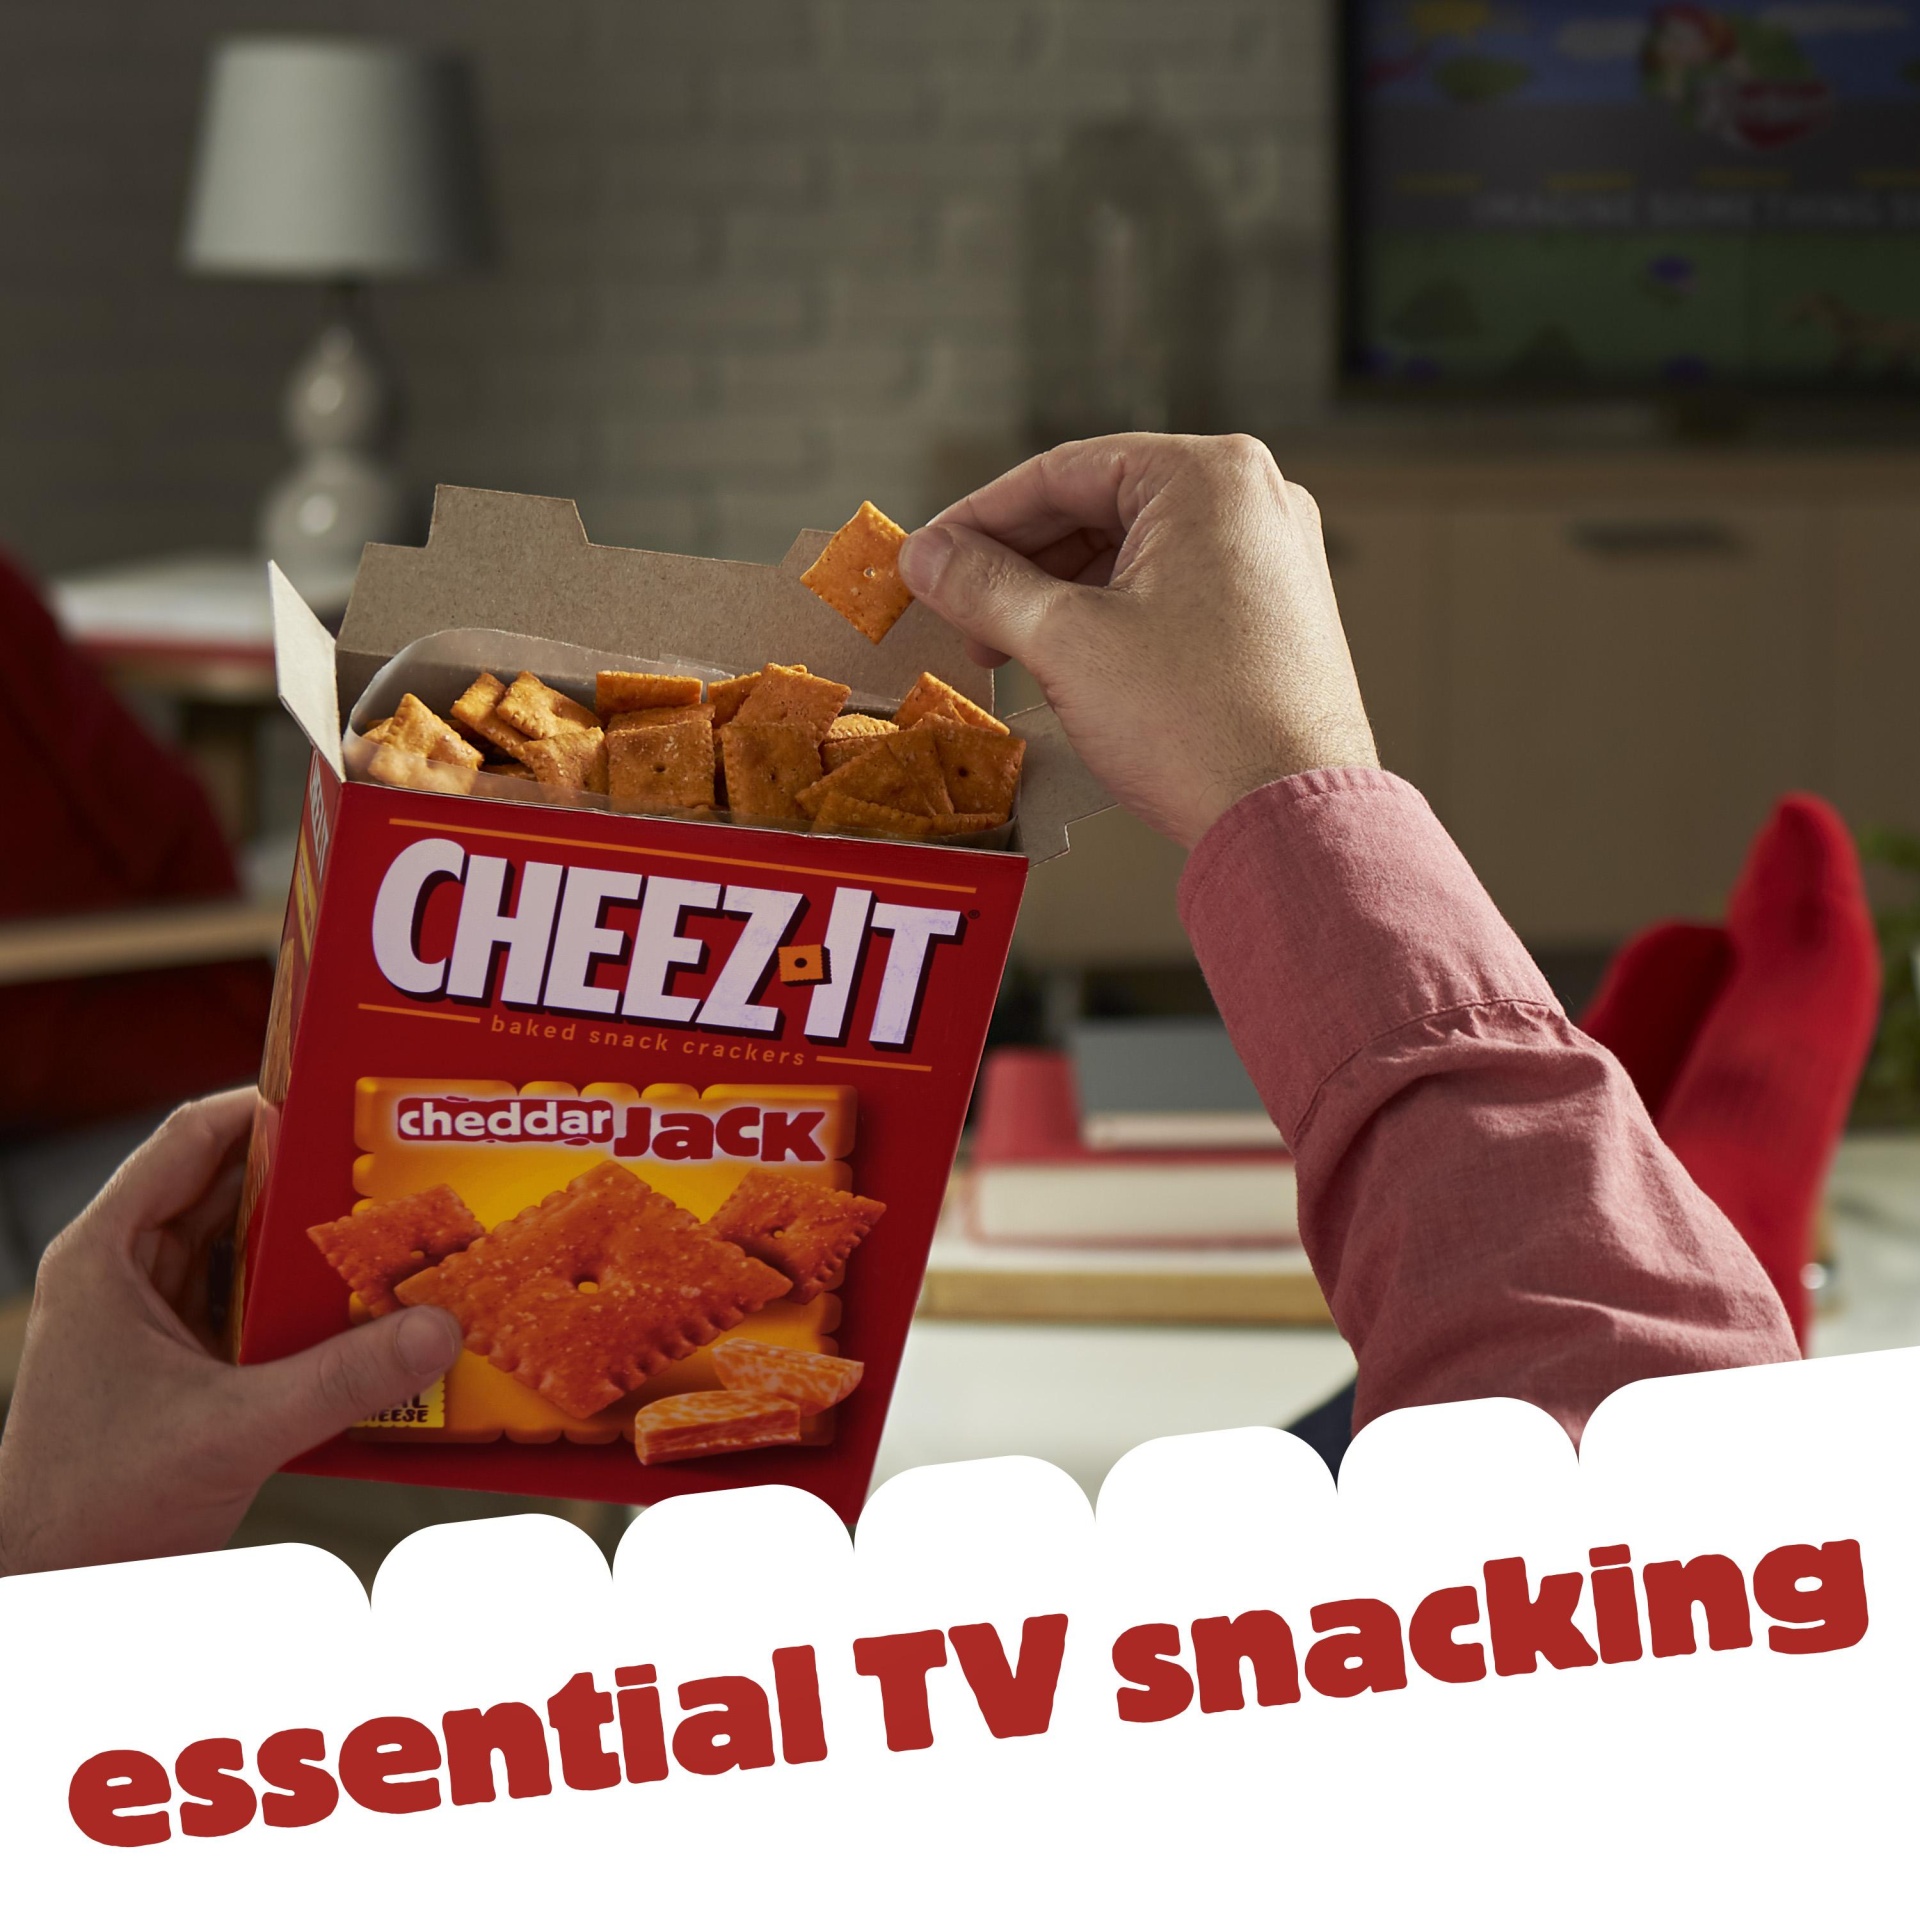 slide 7 of 7, Cheez-It Cheese Crackers, Baked Snack Crackers, Cheddar Jack, 12.4 oz